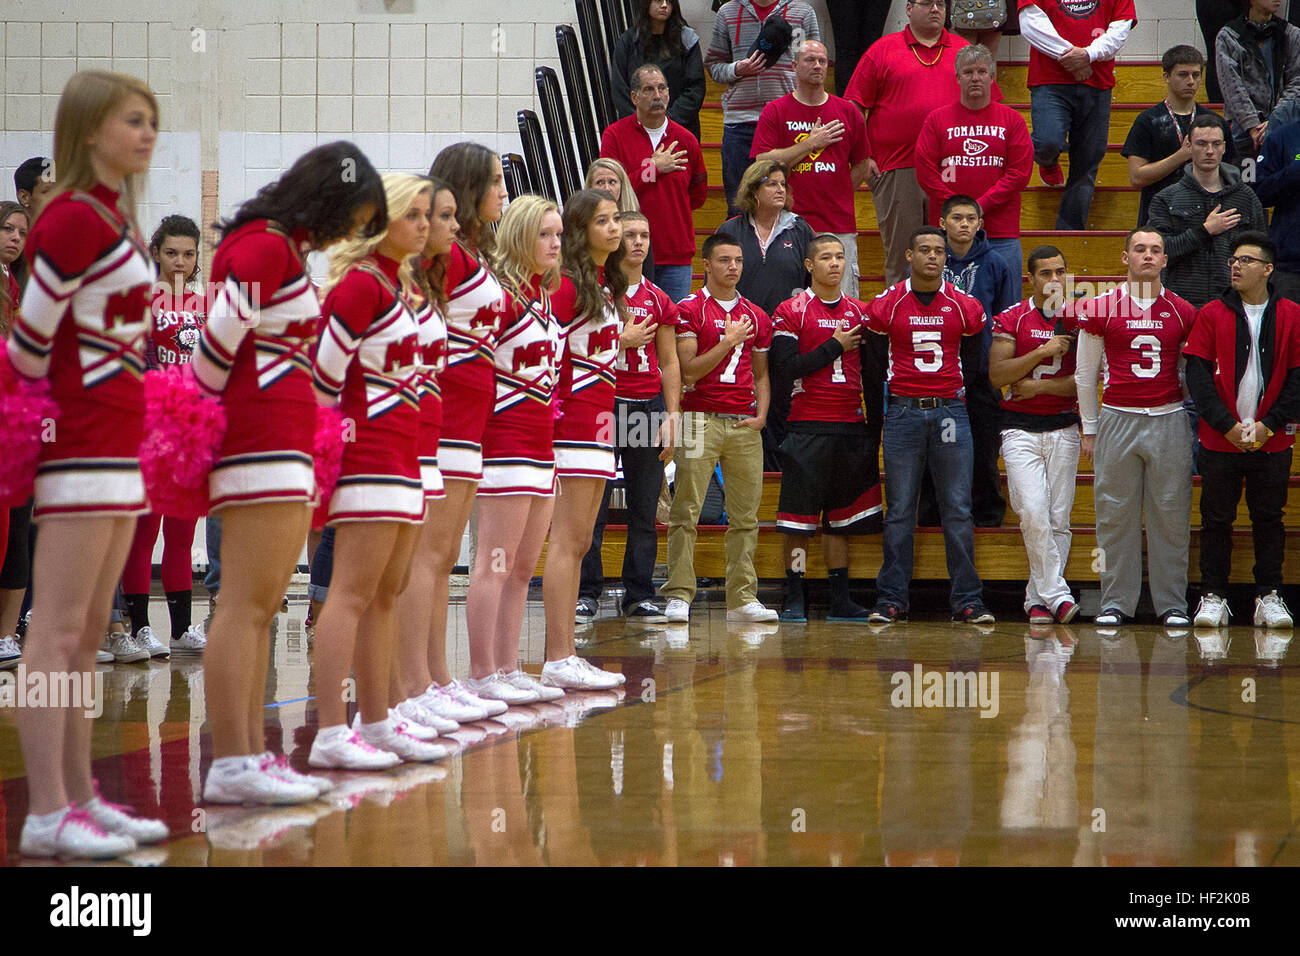 Austin Joyner (jersey number five), a cornerback for the Marysville-Pilchuck High School Tomahawks and 17-year-old native of Marysville, Wash., and classmates honor the national anthem before Joyner received his Semper Fidelis All-American Bowl jersey from Seattle-based Marines during an assembly at Marysville-Pilchuck High School in Marysville, Oct. 17, 2014. Joyner is among approximately 100 student athletes from across the nation selected to participate in the game at the StubHub Center in Carson, Calif., Jan. 4, 2015. He joins Yakima’s West Valley High School football star Shane Lemieux as Stock Photo